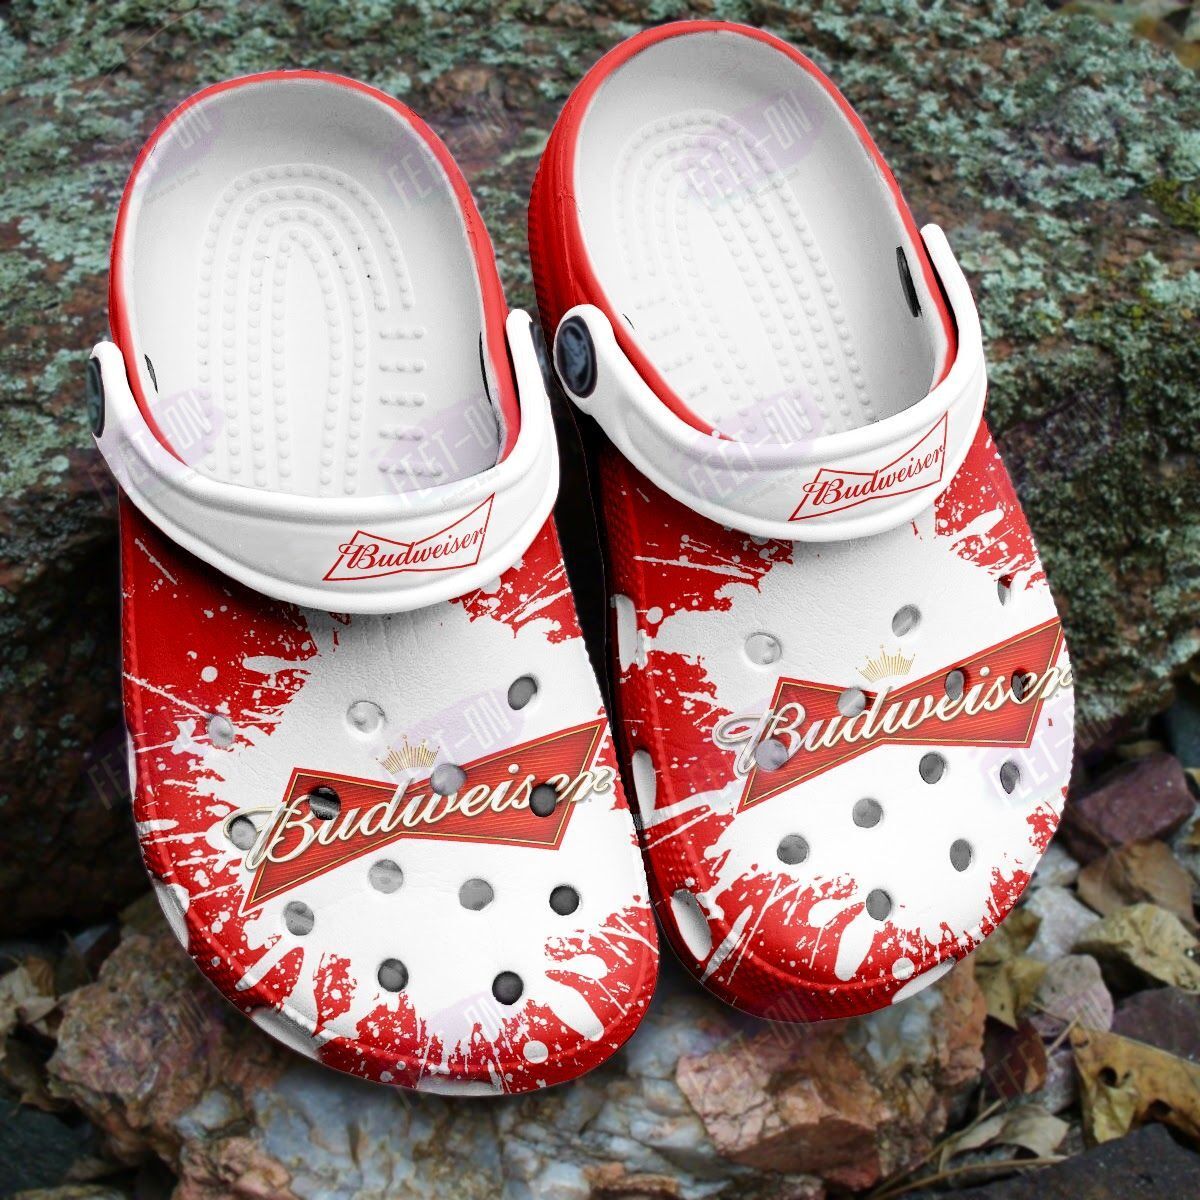 BEST Budweiser red white crocs crocband Shoes